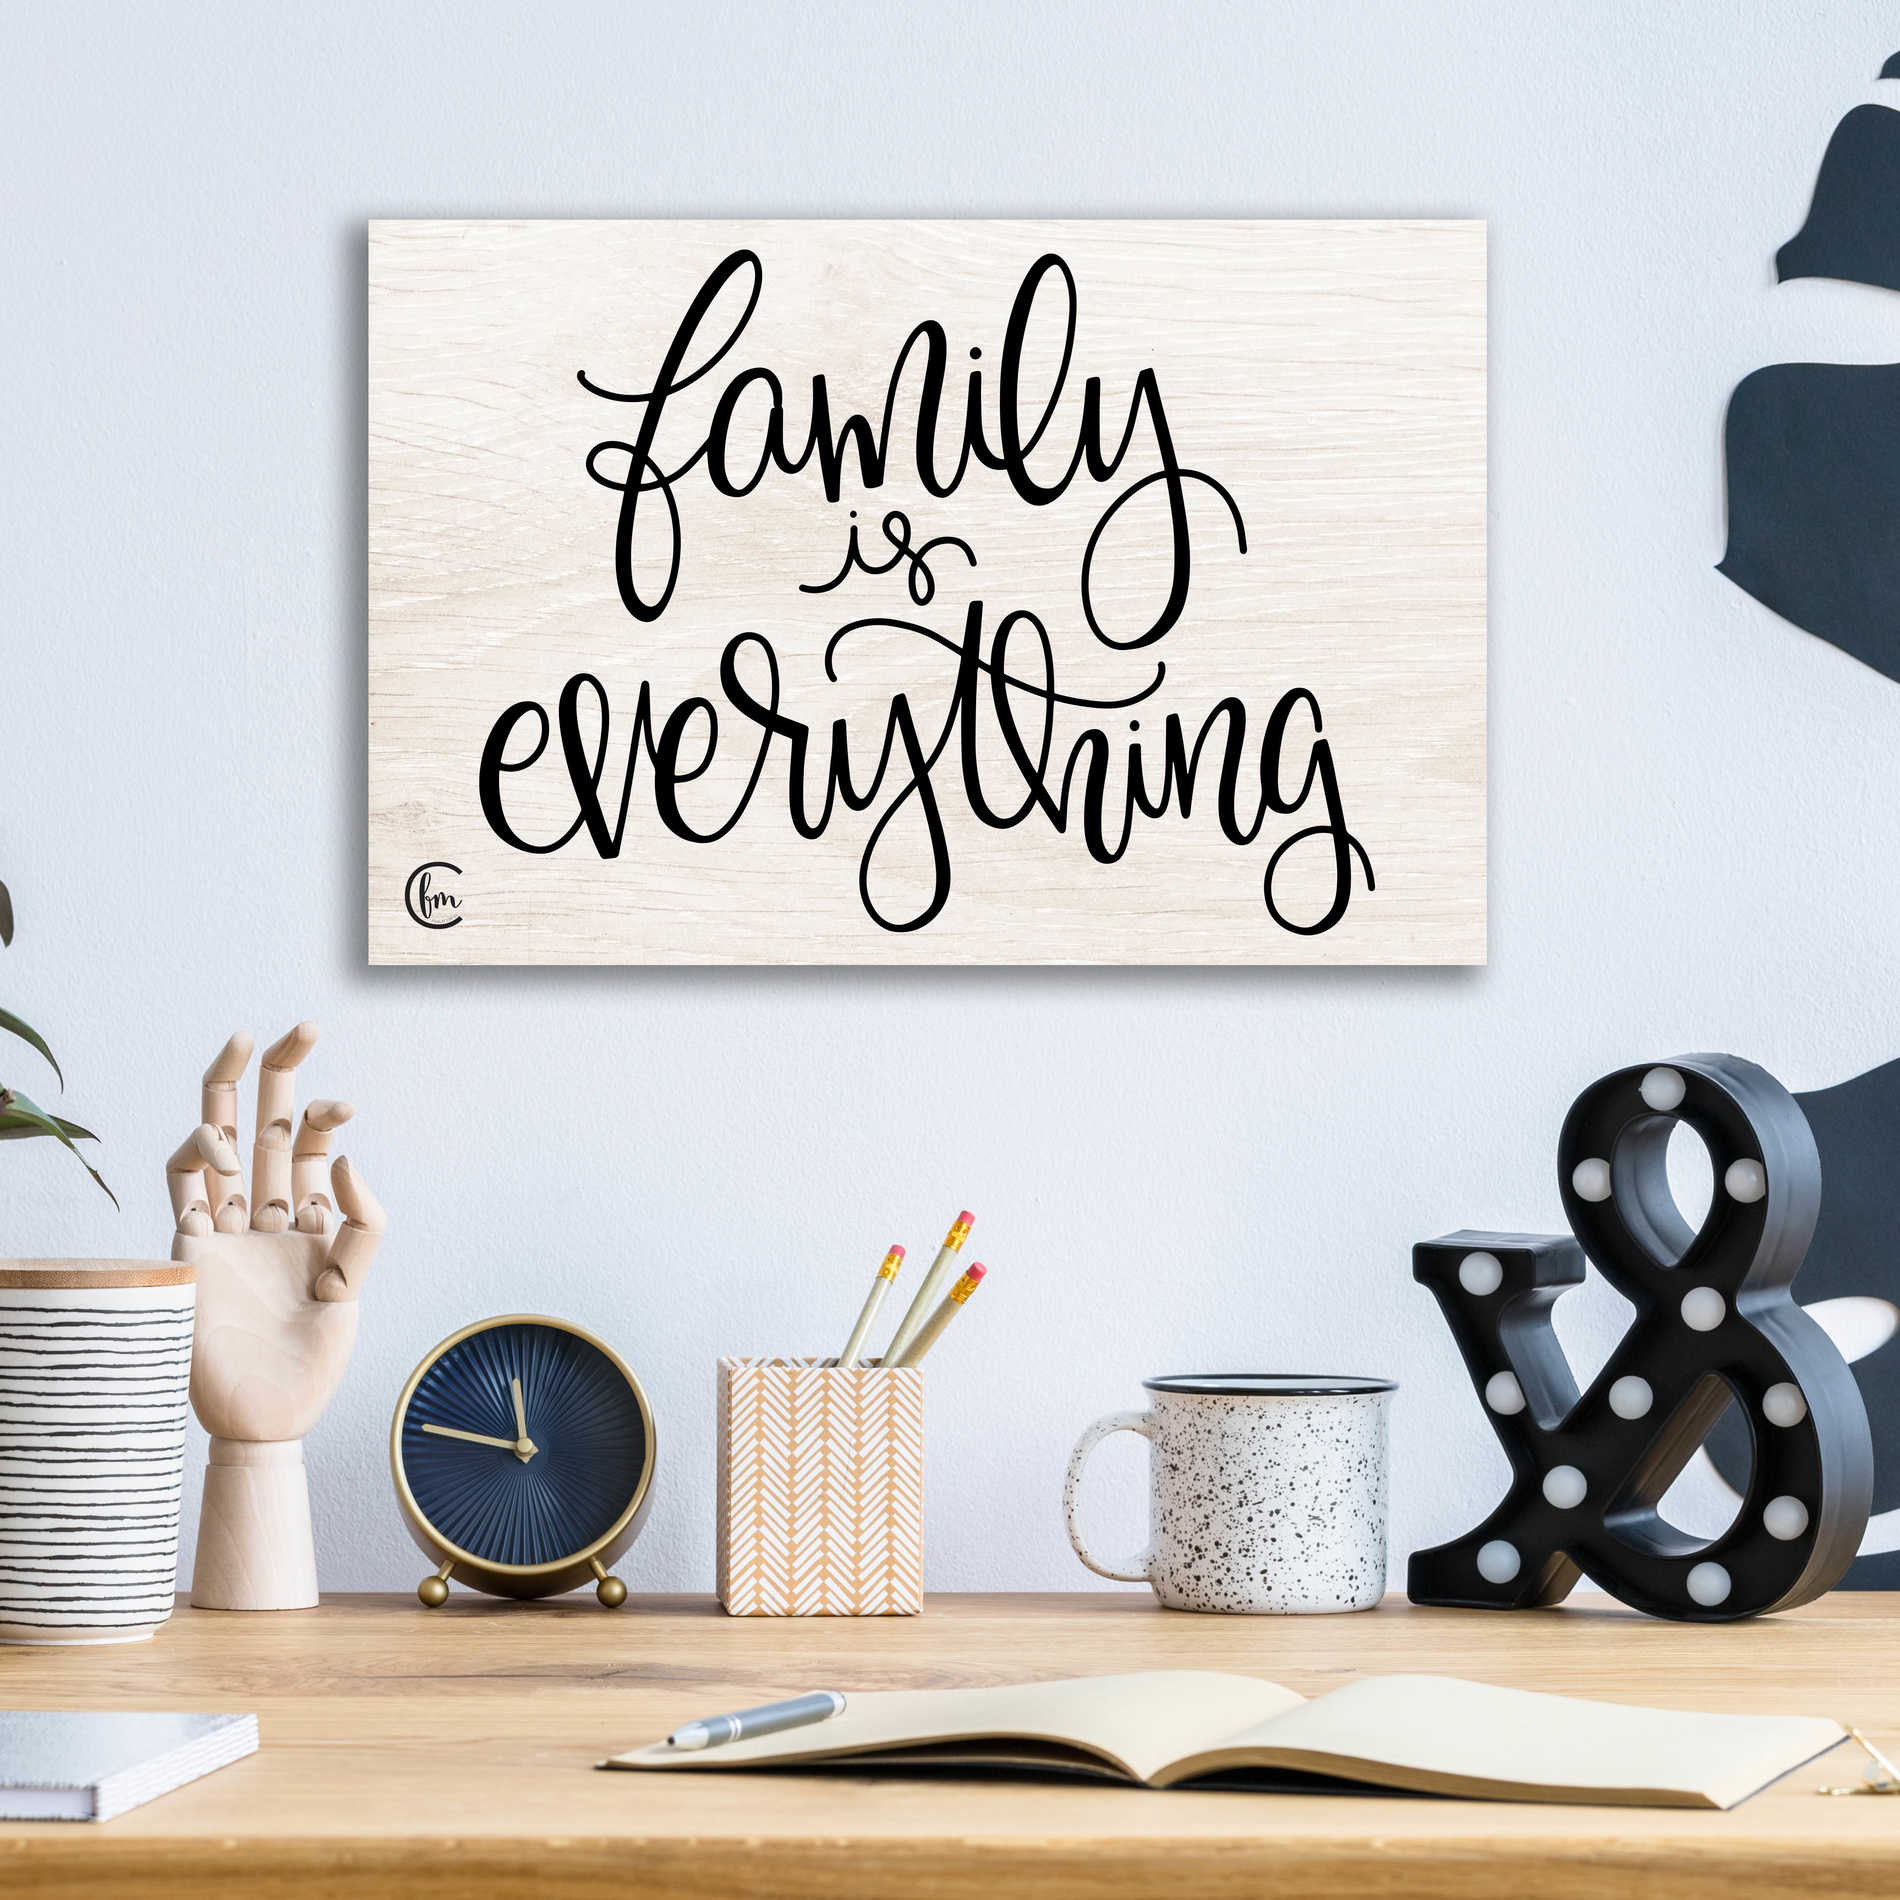 Epic Art 'Family is Everything' by Fearfully Made Creations, Acrylic Glass Wall Art,16x12